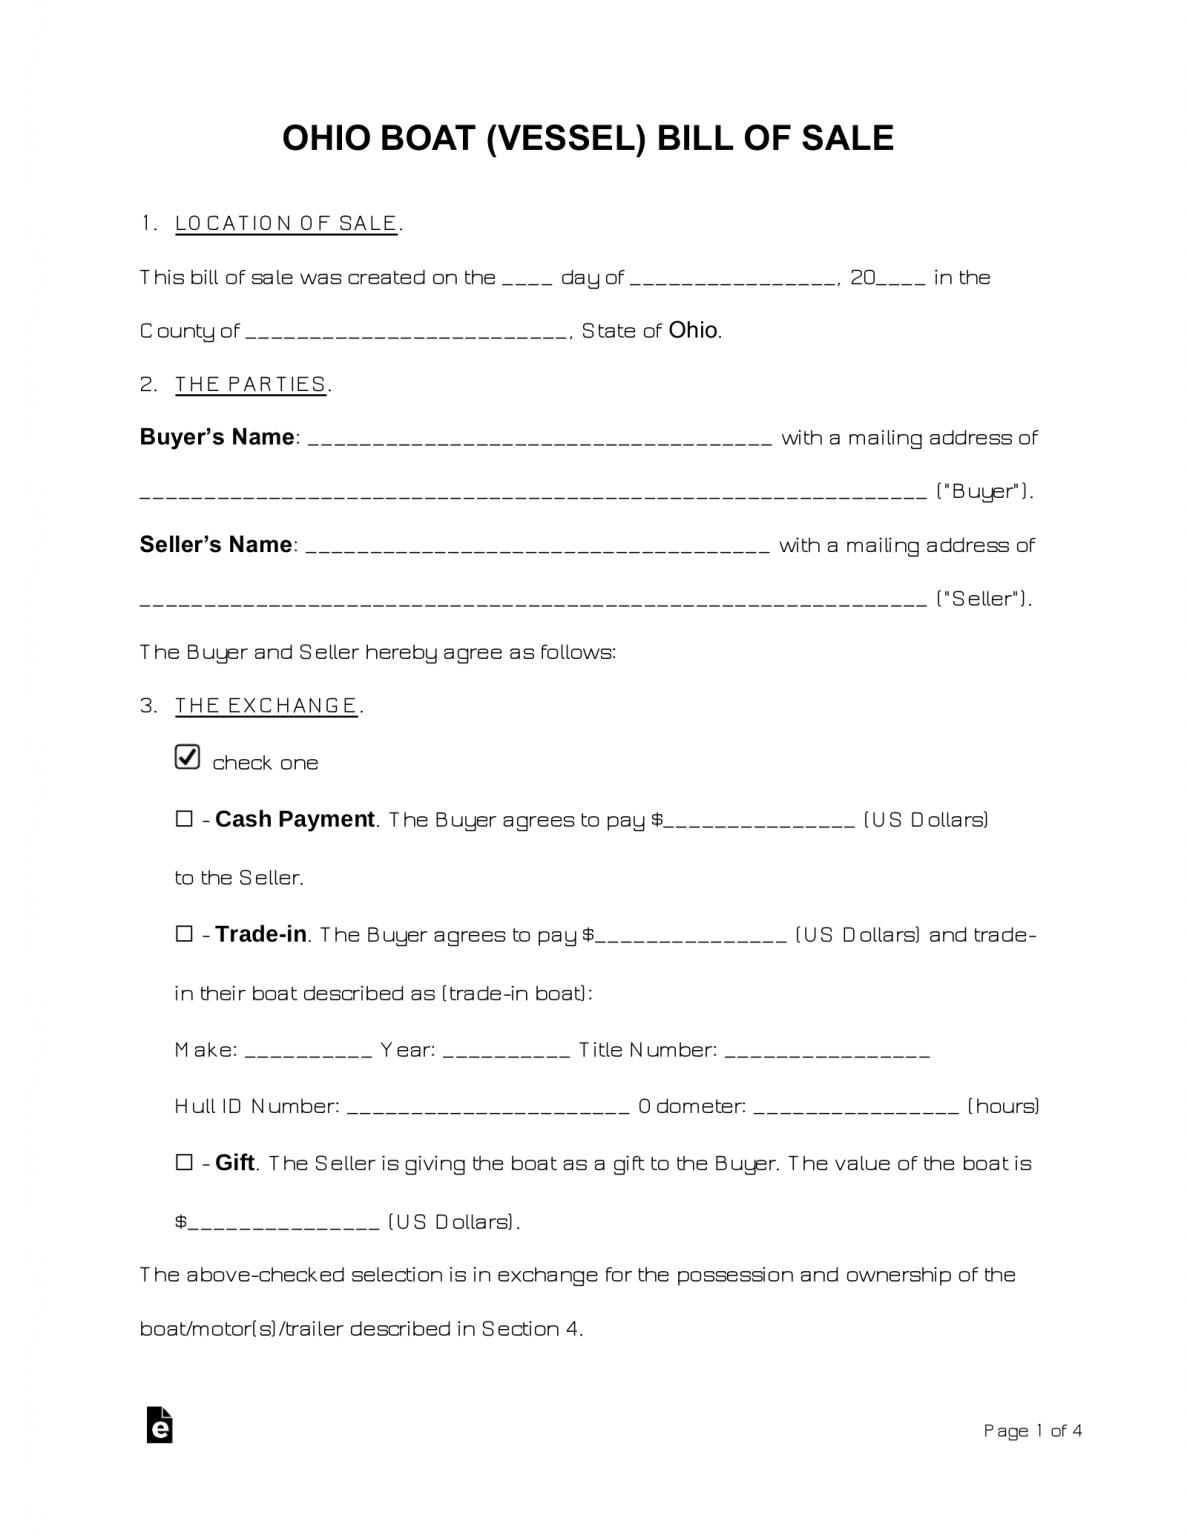 free-ohio-bill-of-sale-forms-4-pdf-word-eforms